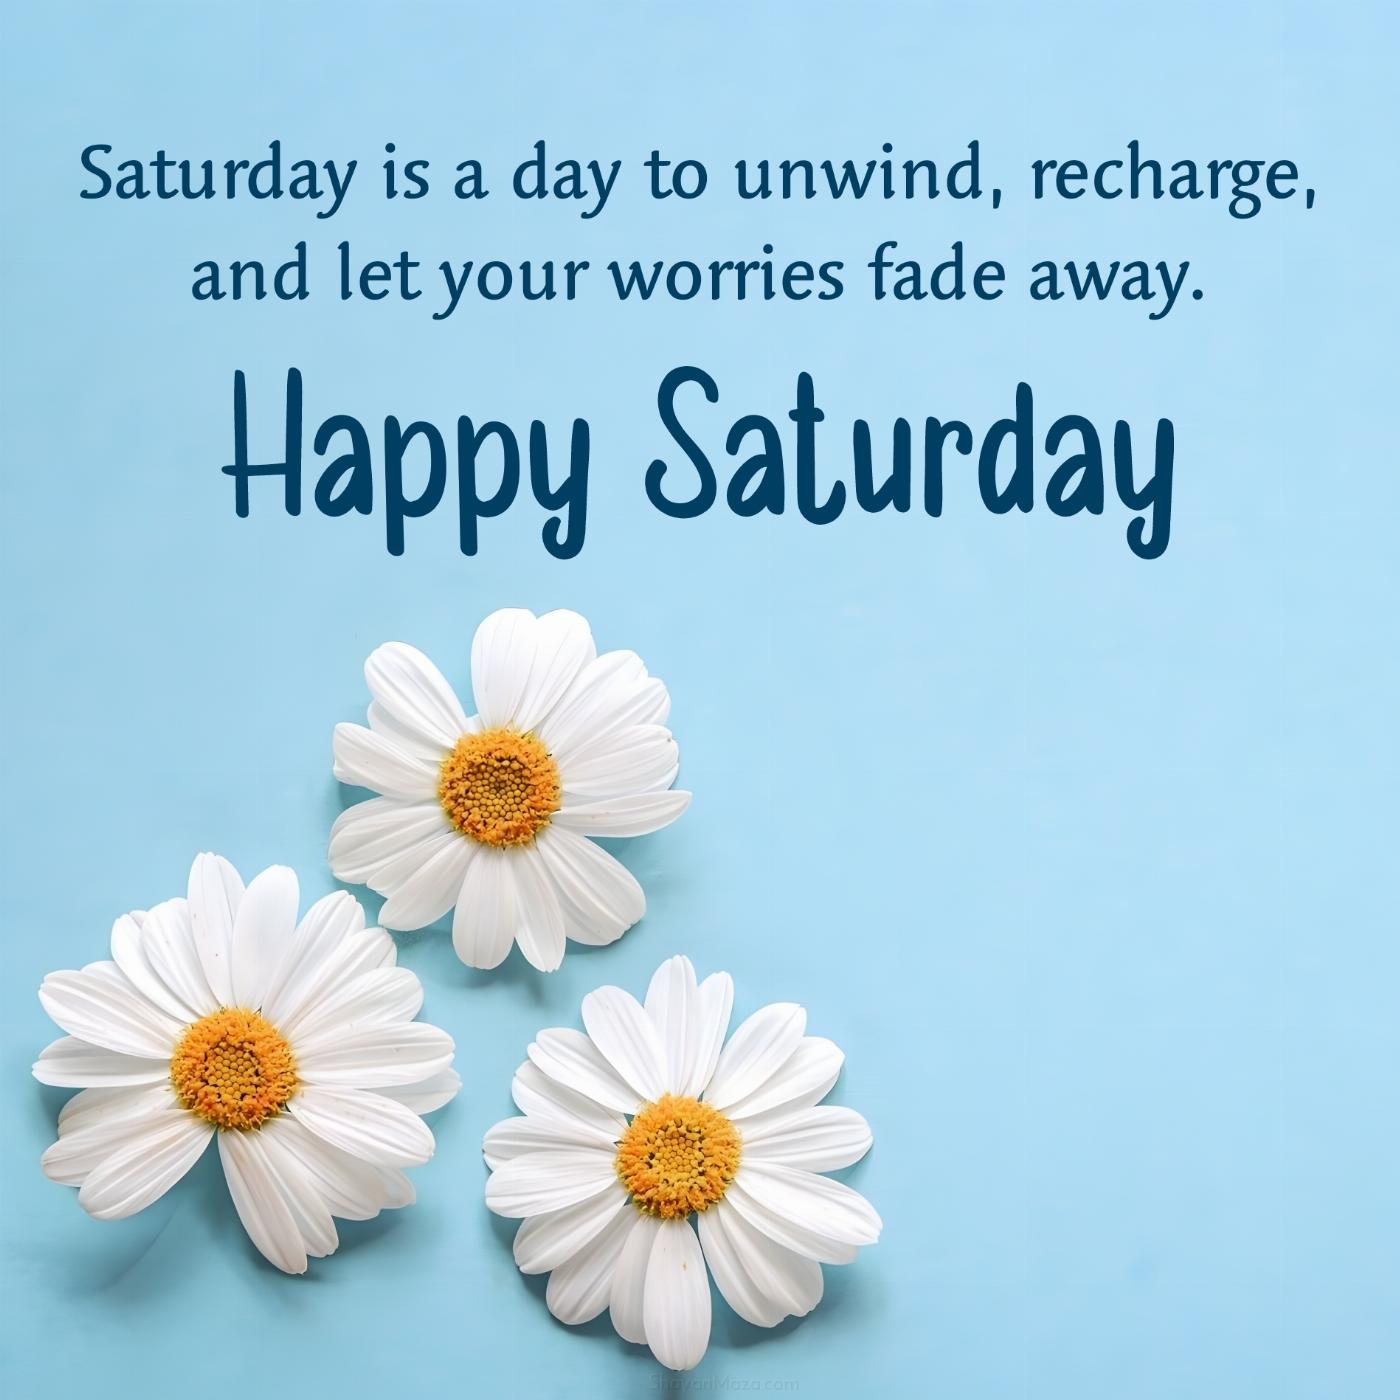 Saturday is a day to unwind recharge and let your worries